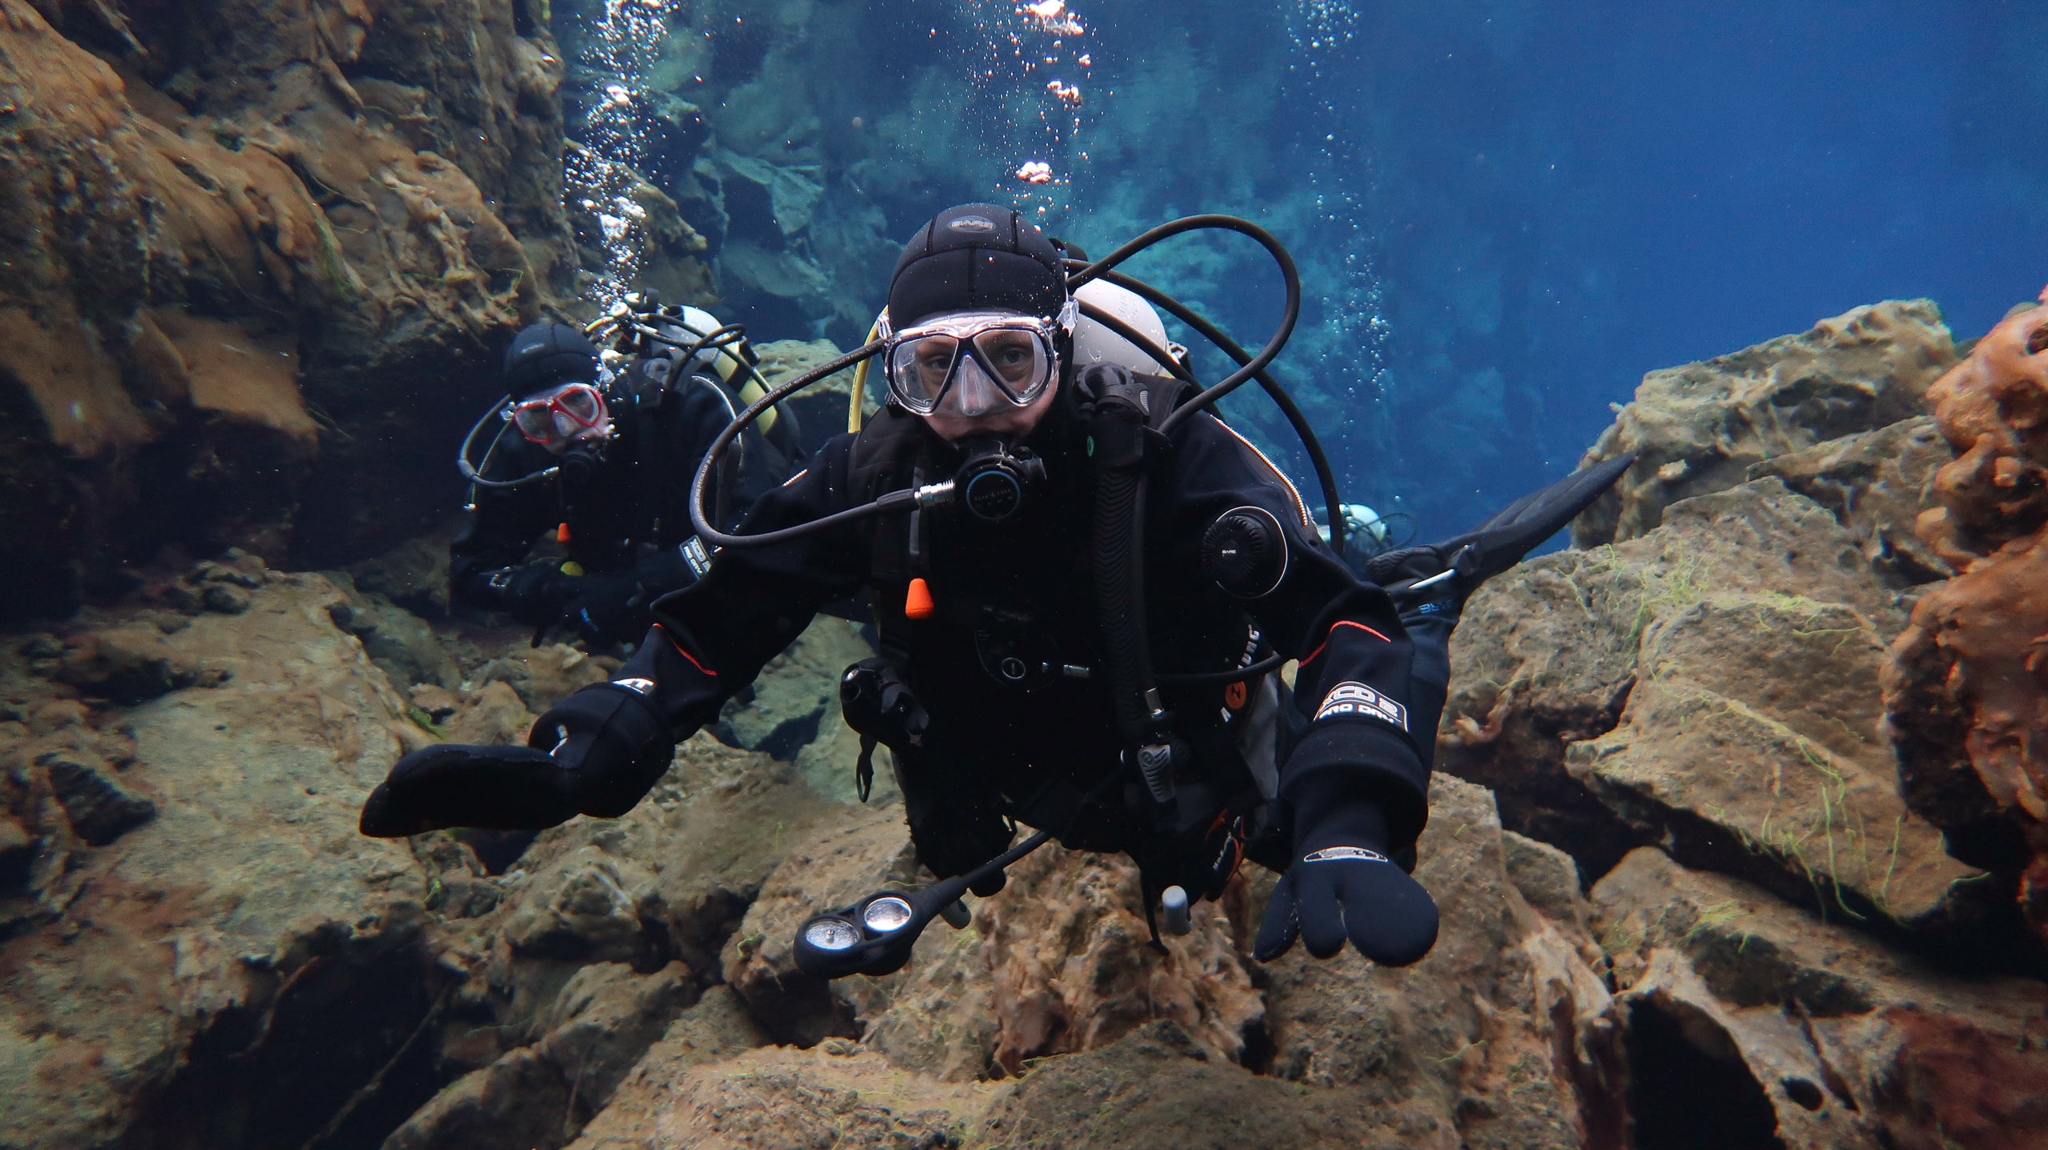 Des and Belinda scuba diving at Silfra Fissure in Thingvellir National Park, Iceland. Photo by Tania Roque of DIVE.IS